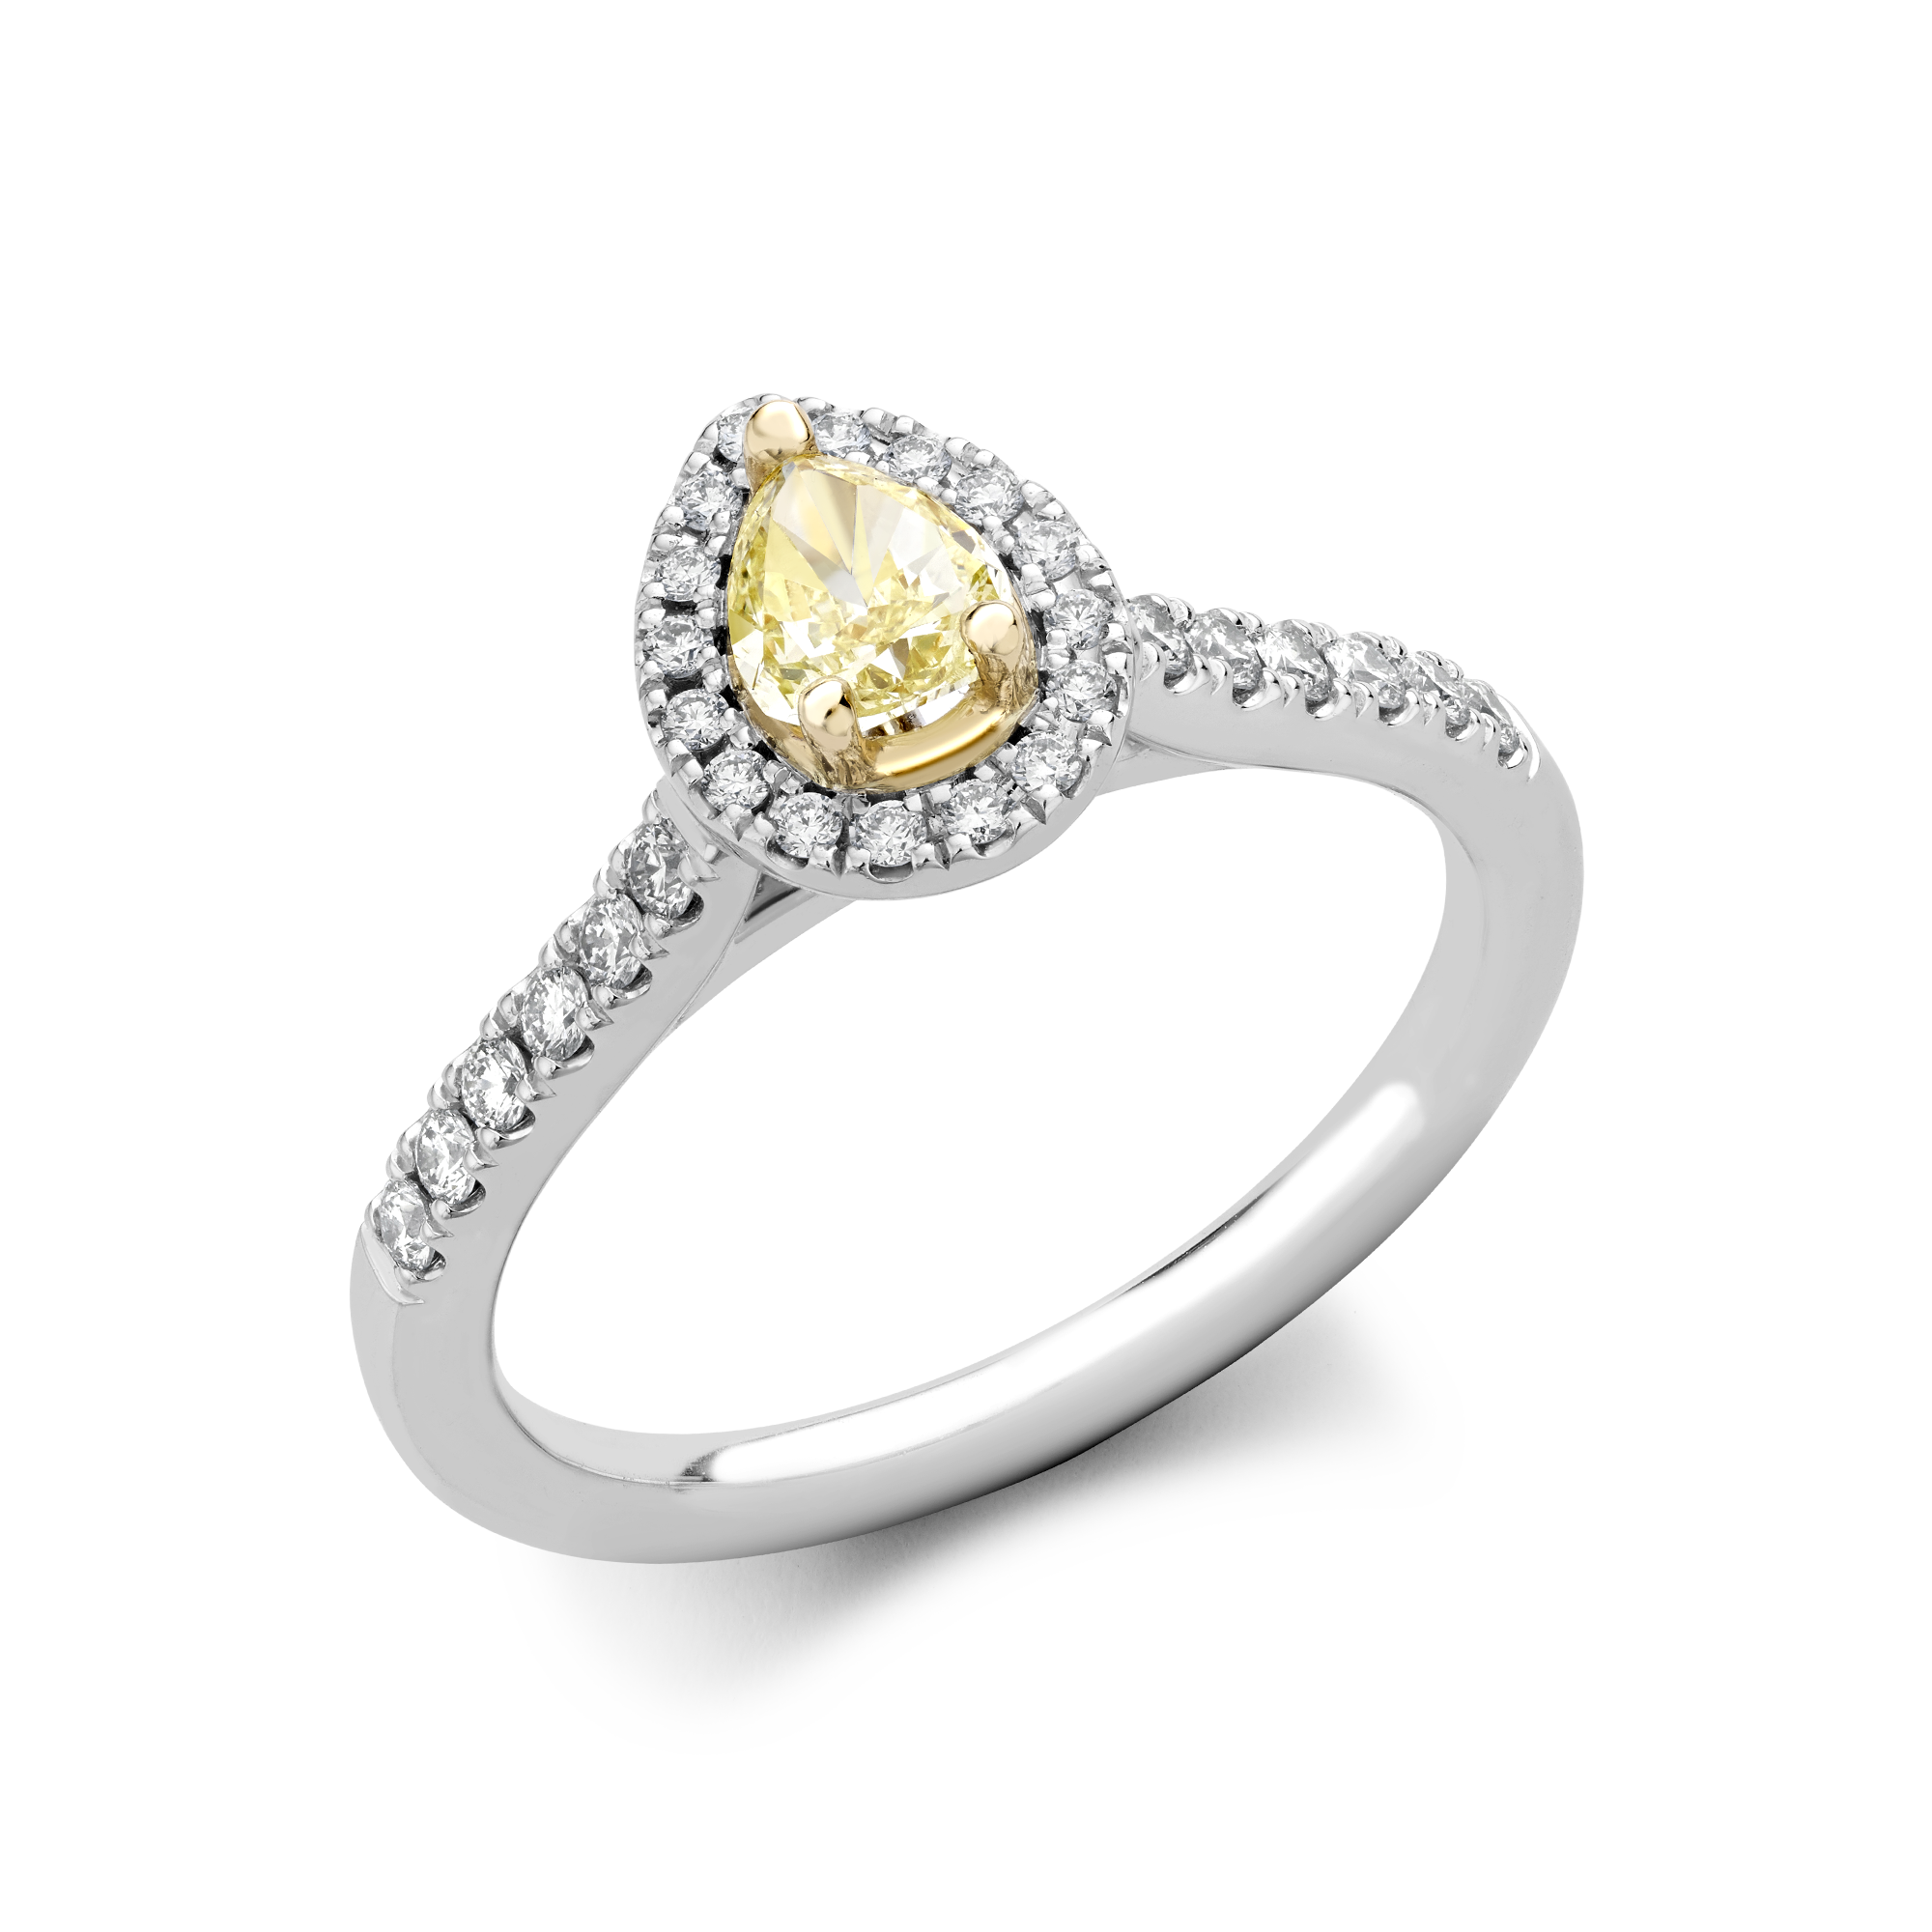 Celestial 0.36ct Fancy Light Yellow-Green Diamond Cluster Ring Pear & Brilliant Cut, Claw Set_1